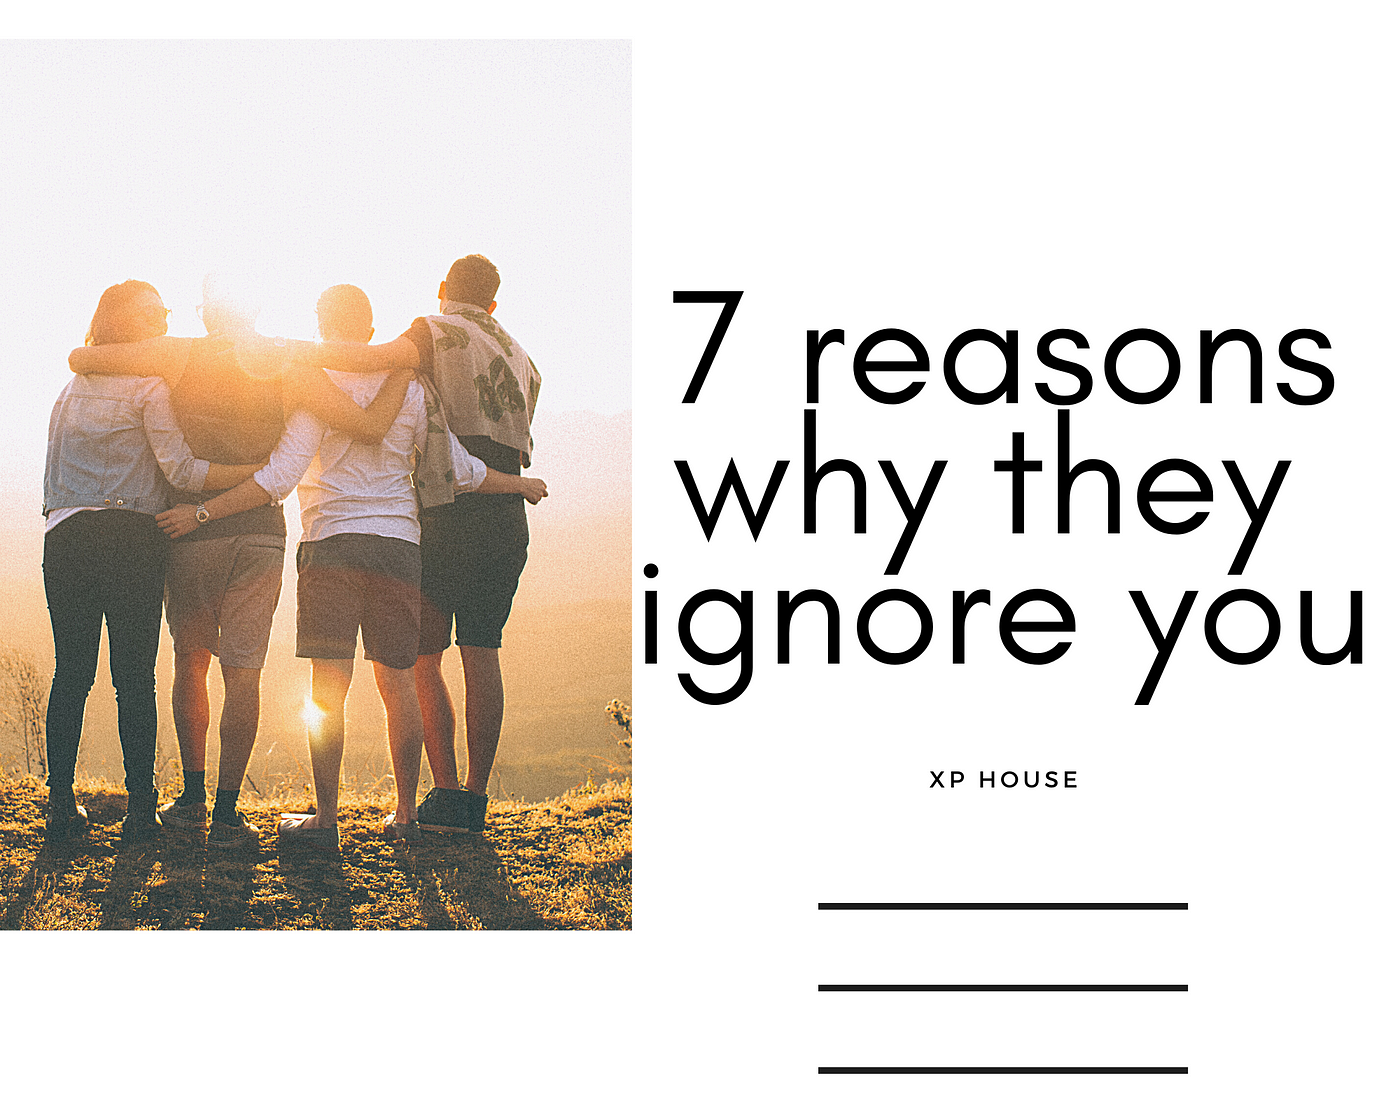 Reasons why you should pleasure yourself often